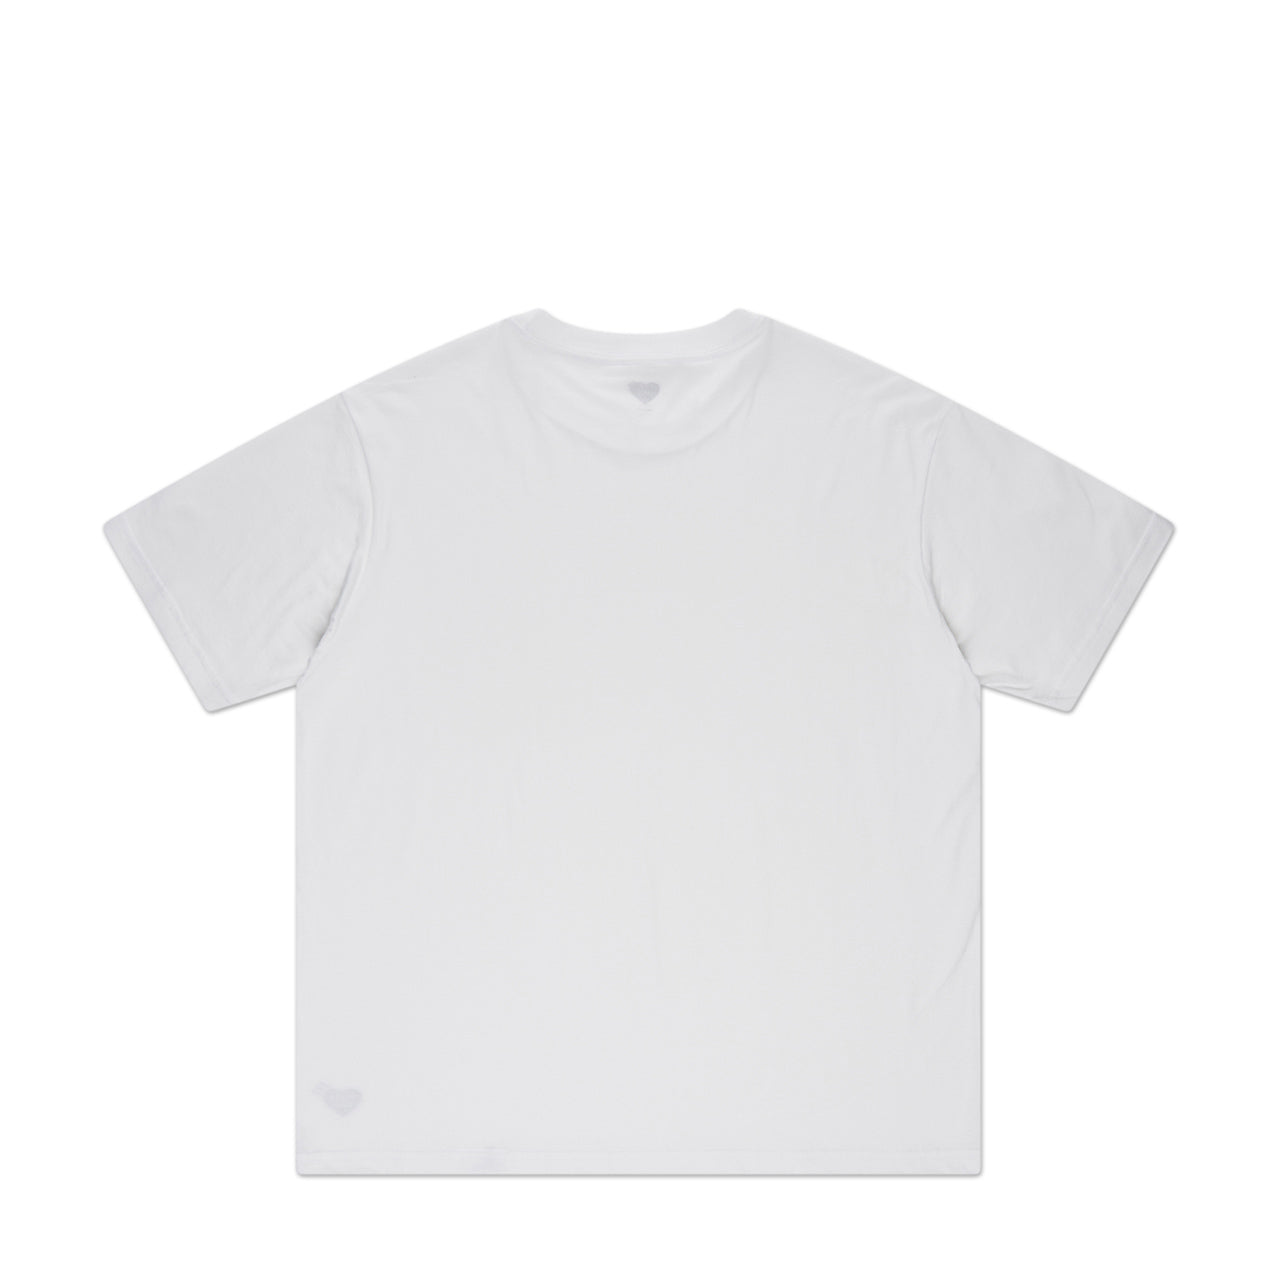 human made 3-pack t-shirt pack (white) - a.plus store